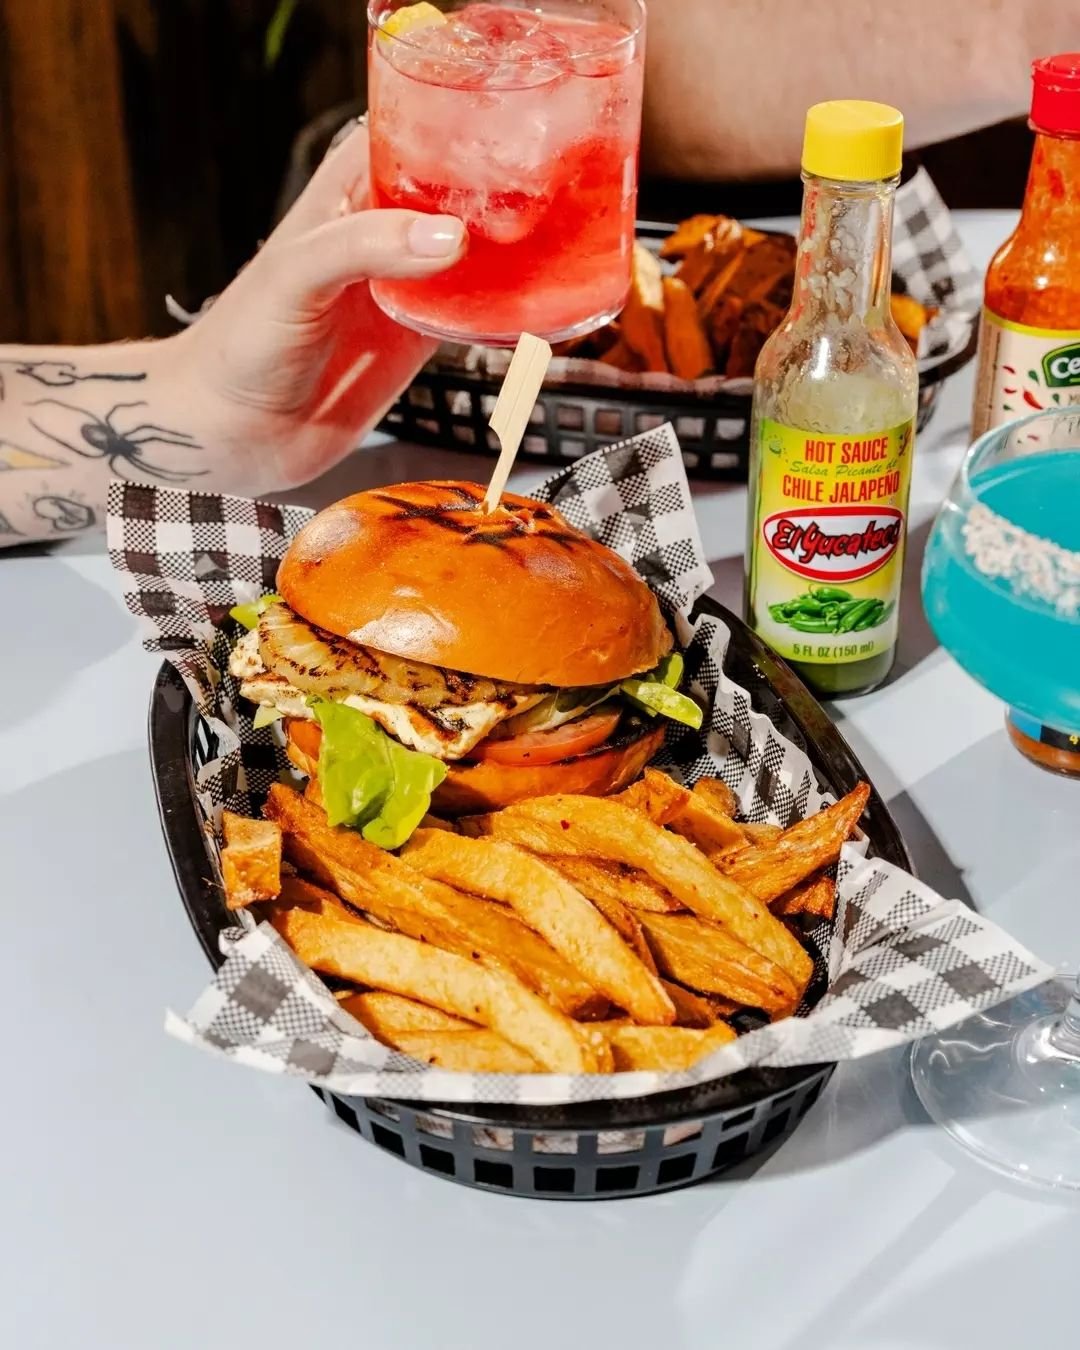 KEY WEST BURGER 🍔🍔 Halloumi, guava, grilled pineapple, lettuce, spiced ketchup &amp; onion on a potato bun.

Come and get your hands dirty with one of our juicy burgers with a Latin-American flare.